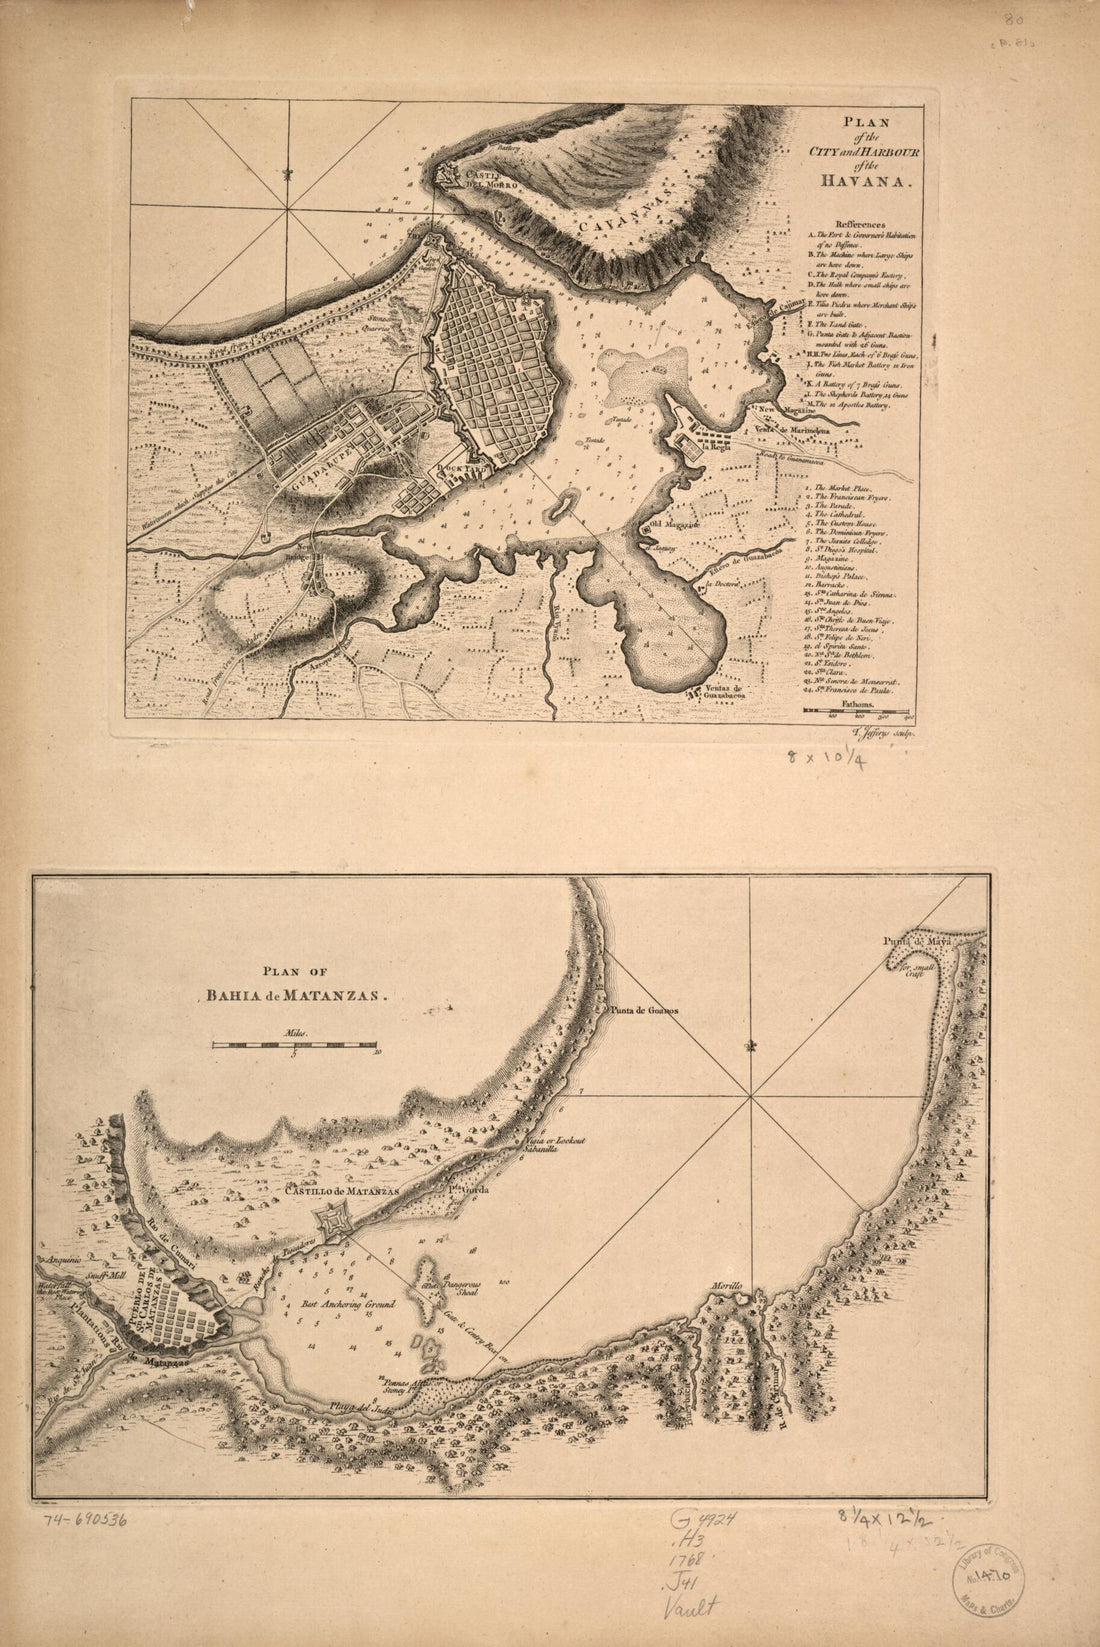 This old map of Plan of the City and Harbour of the Havana. Plan of Bahía De Matanzas from 1768 was created by Thomas Jefferys in 1768